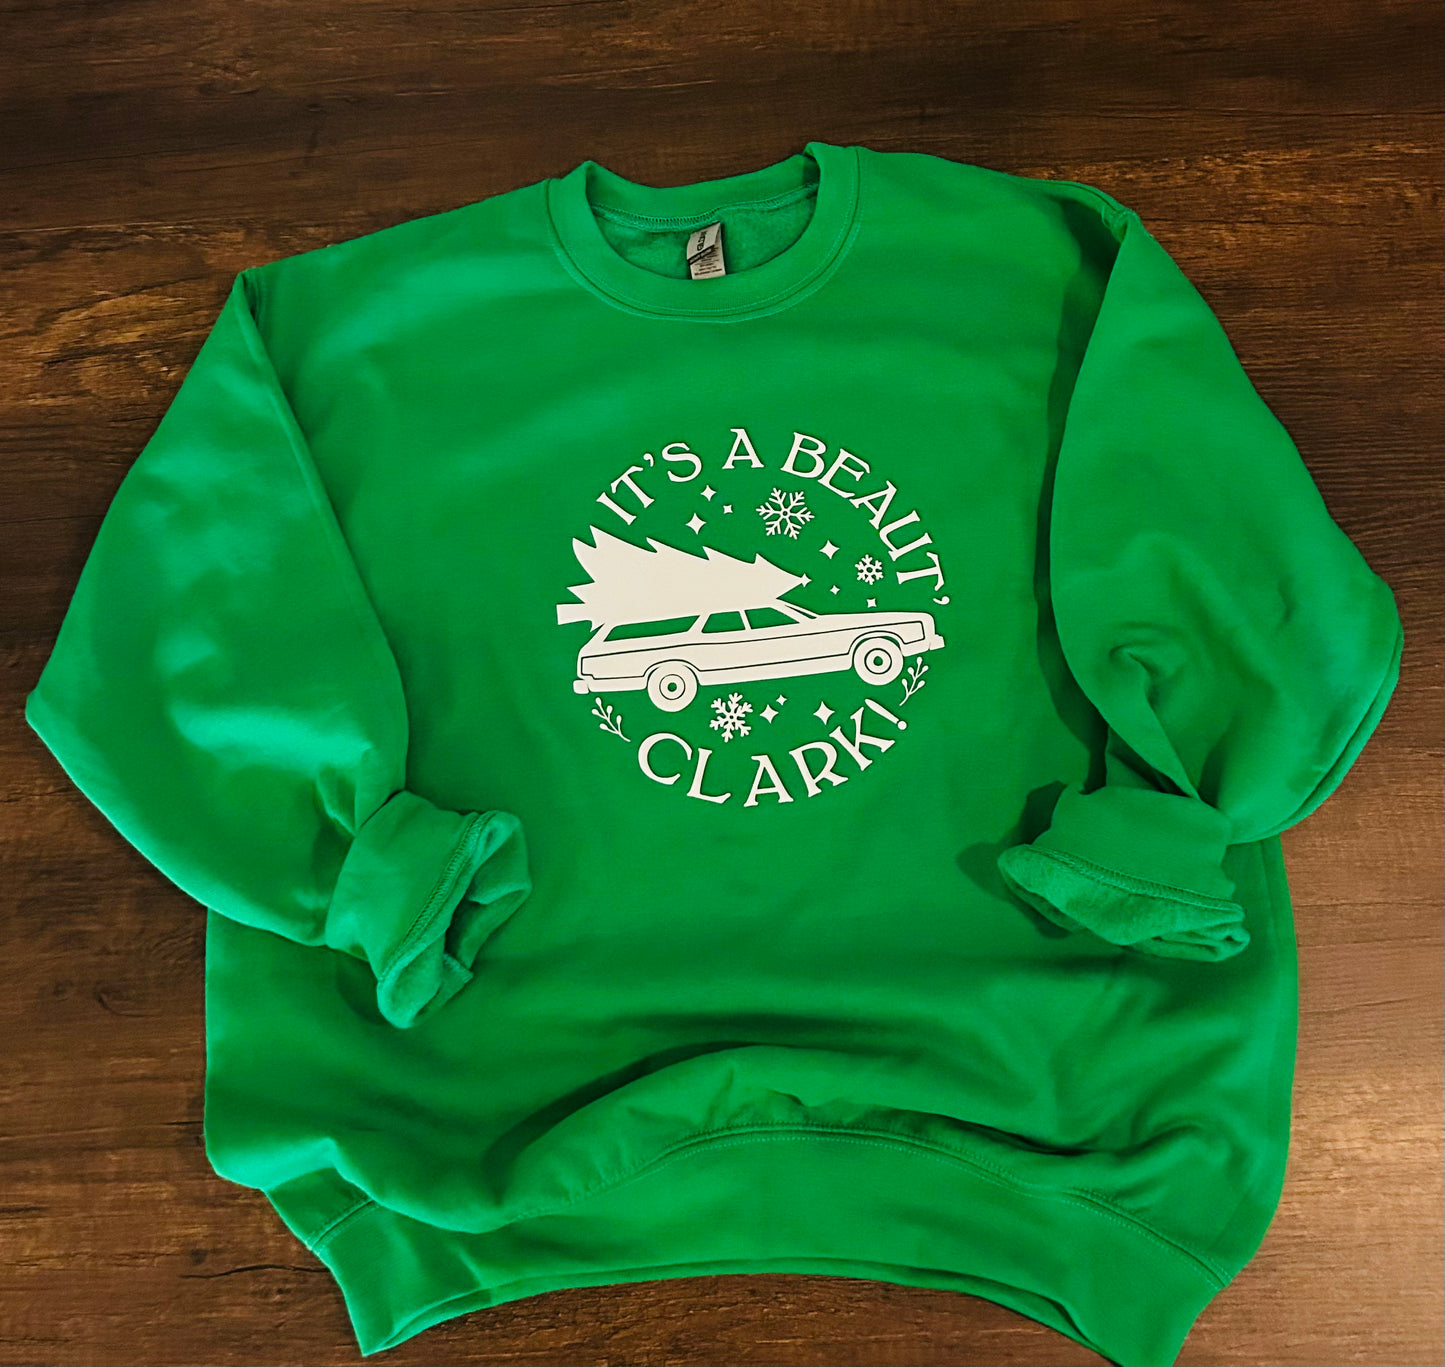 It's a Beaut' Clark Crewneck Adult and Youth Sizing